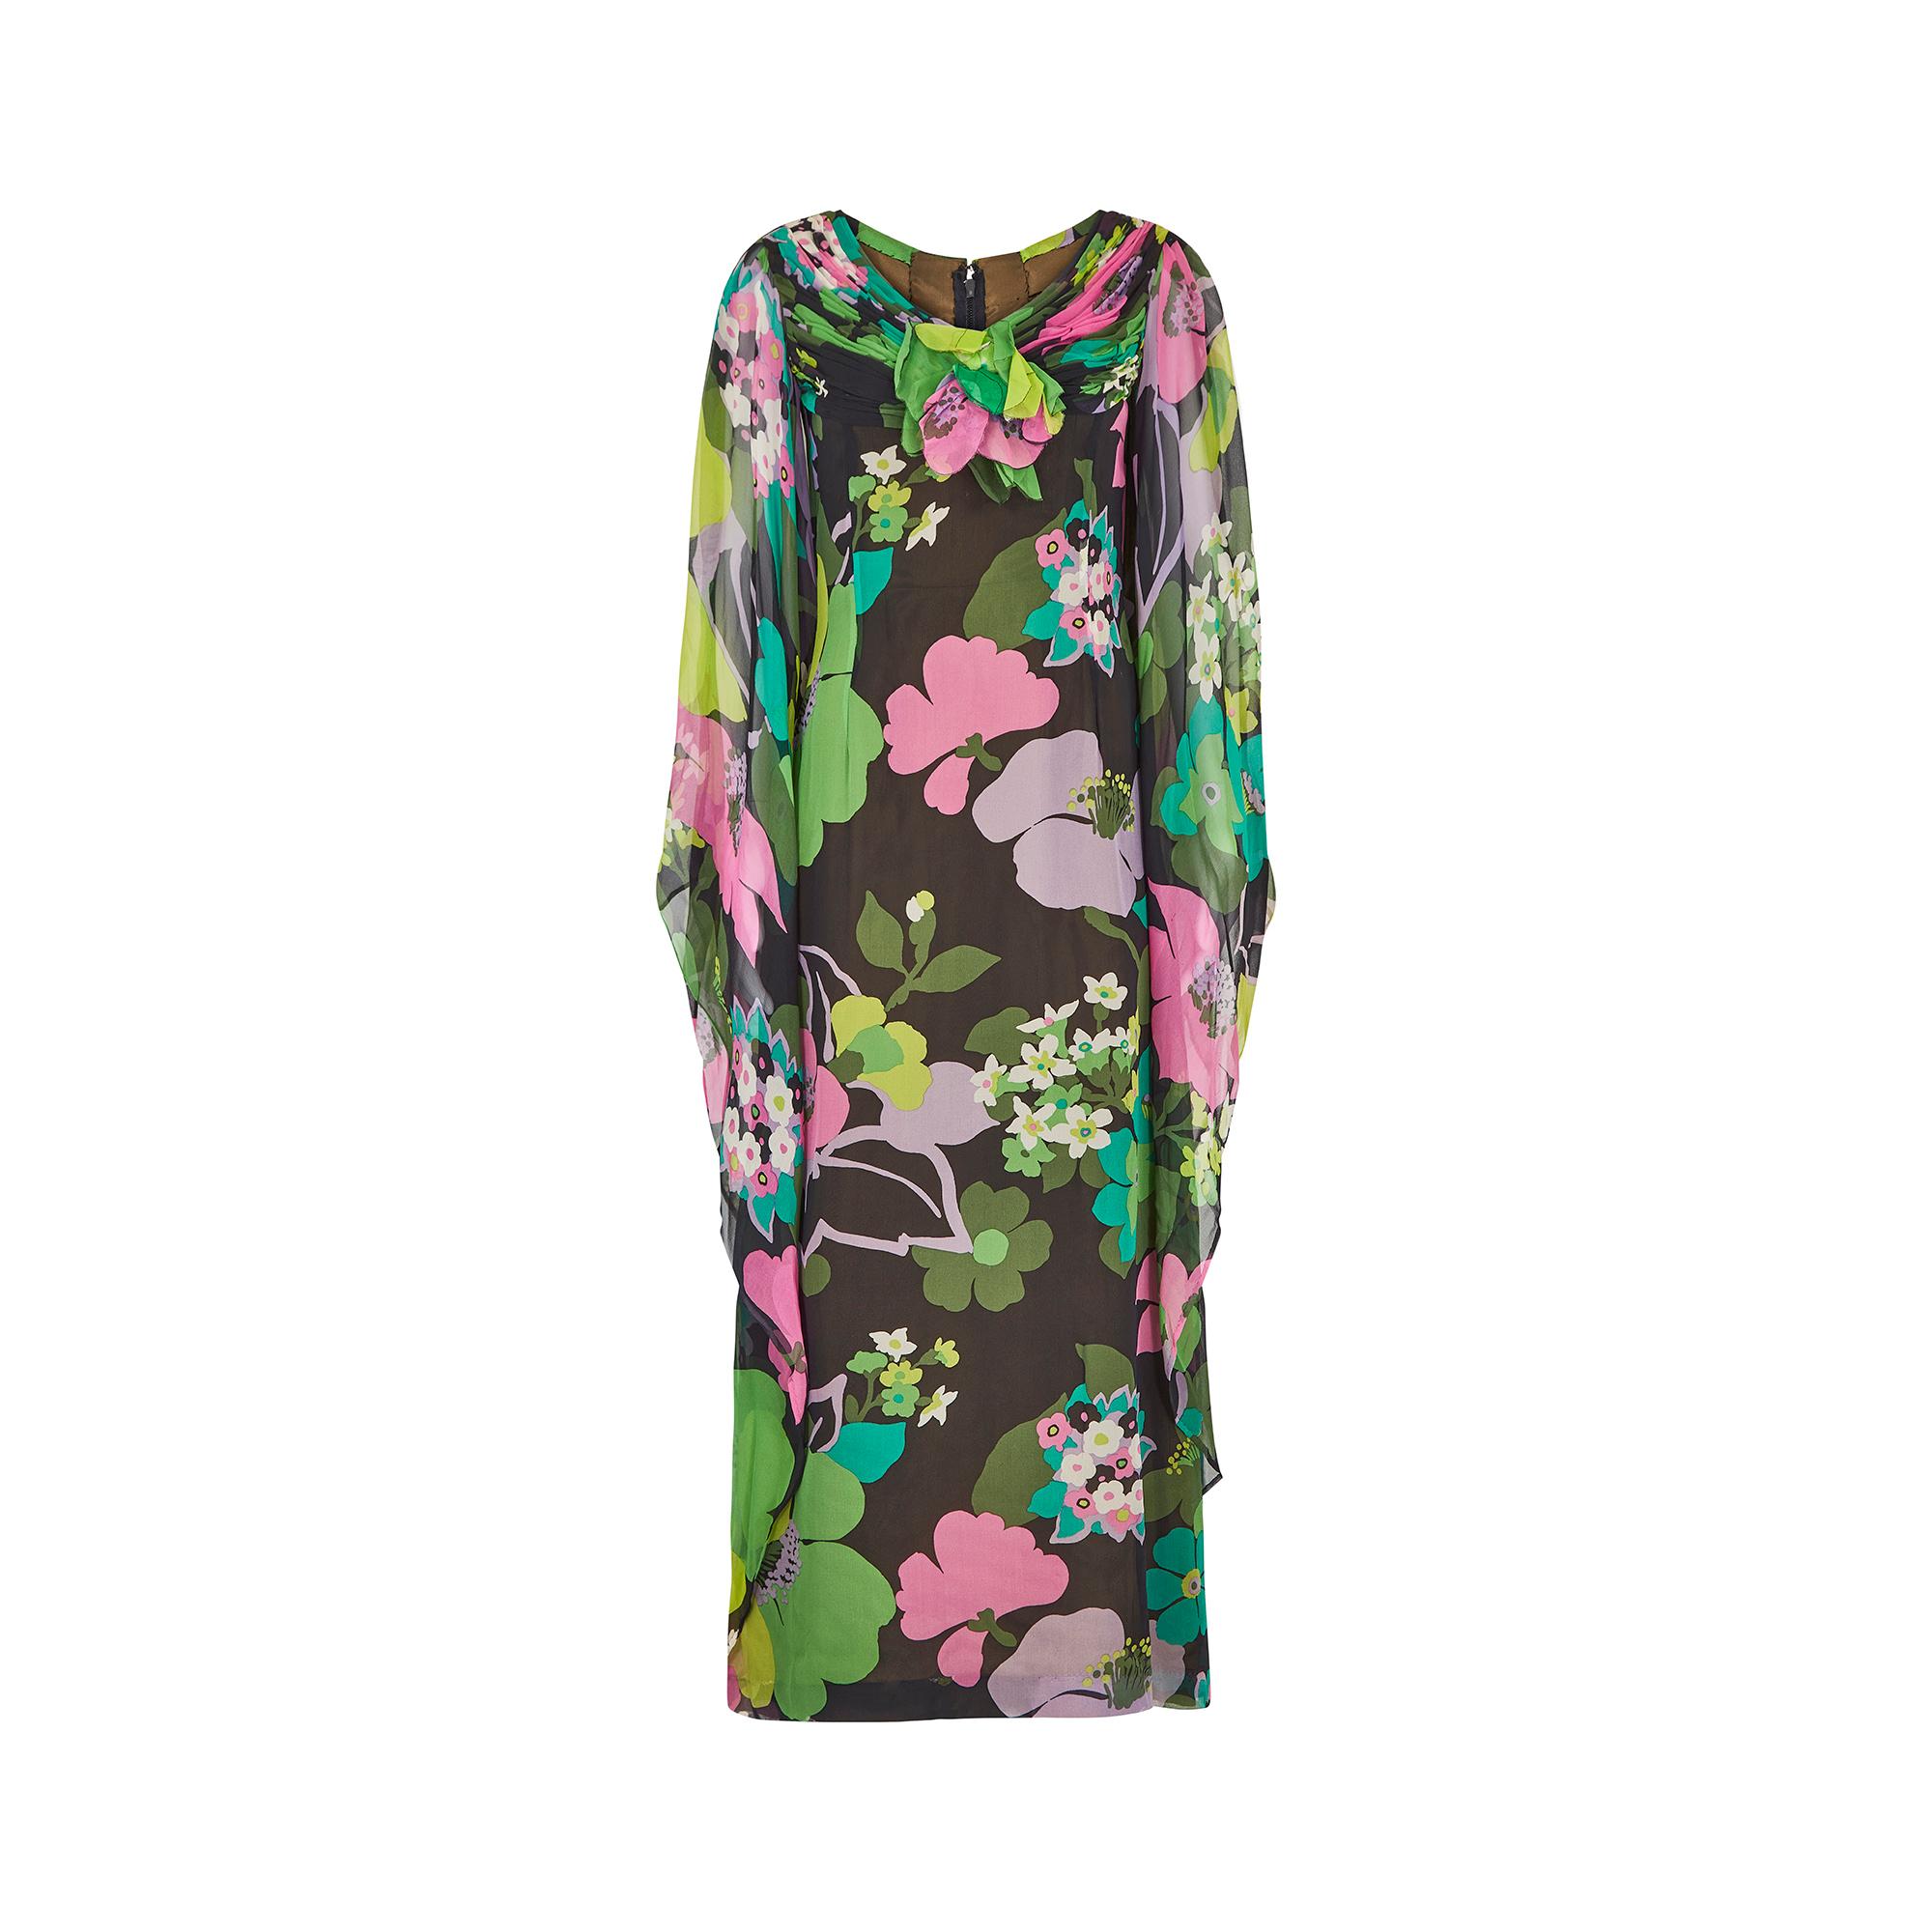 Late 1960s or early 1970s silk chiffon angel sleeve dress with the most magnificent tropical floral print.  The elegant neckline has a series of ruching forming the v-neck that crosses over at the collar bone. There is a large floral applique in the